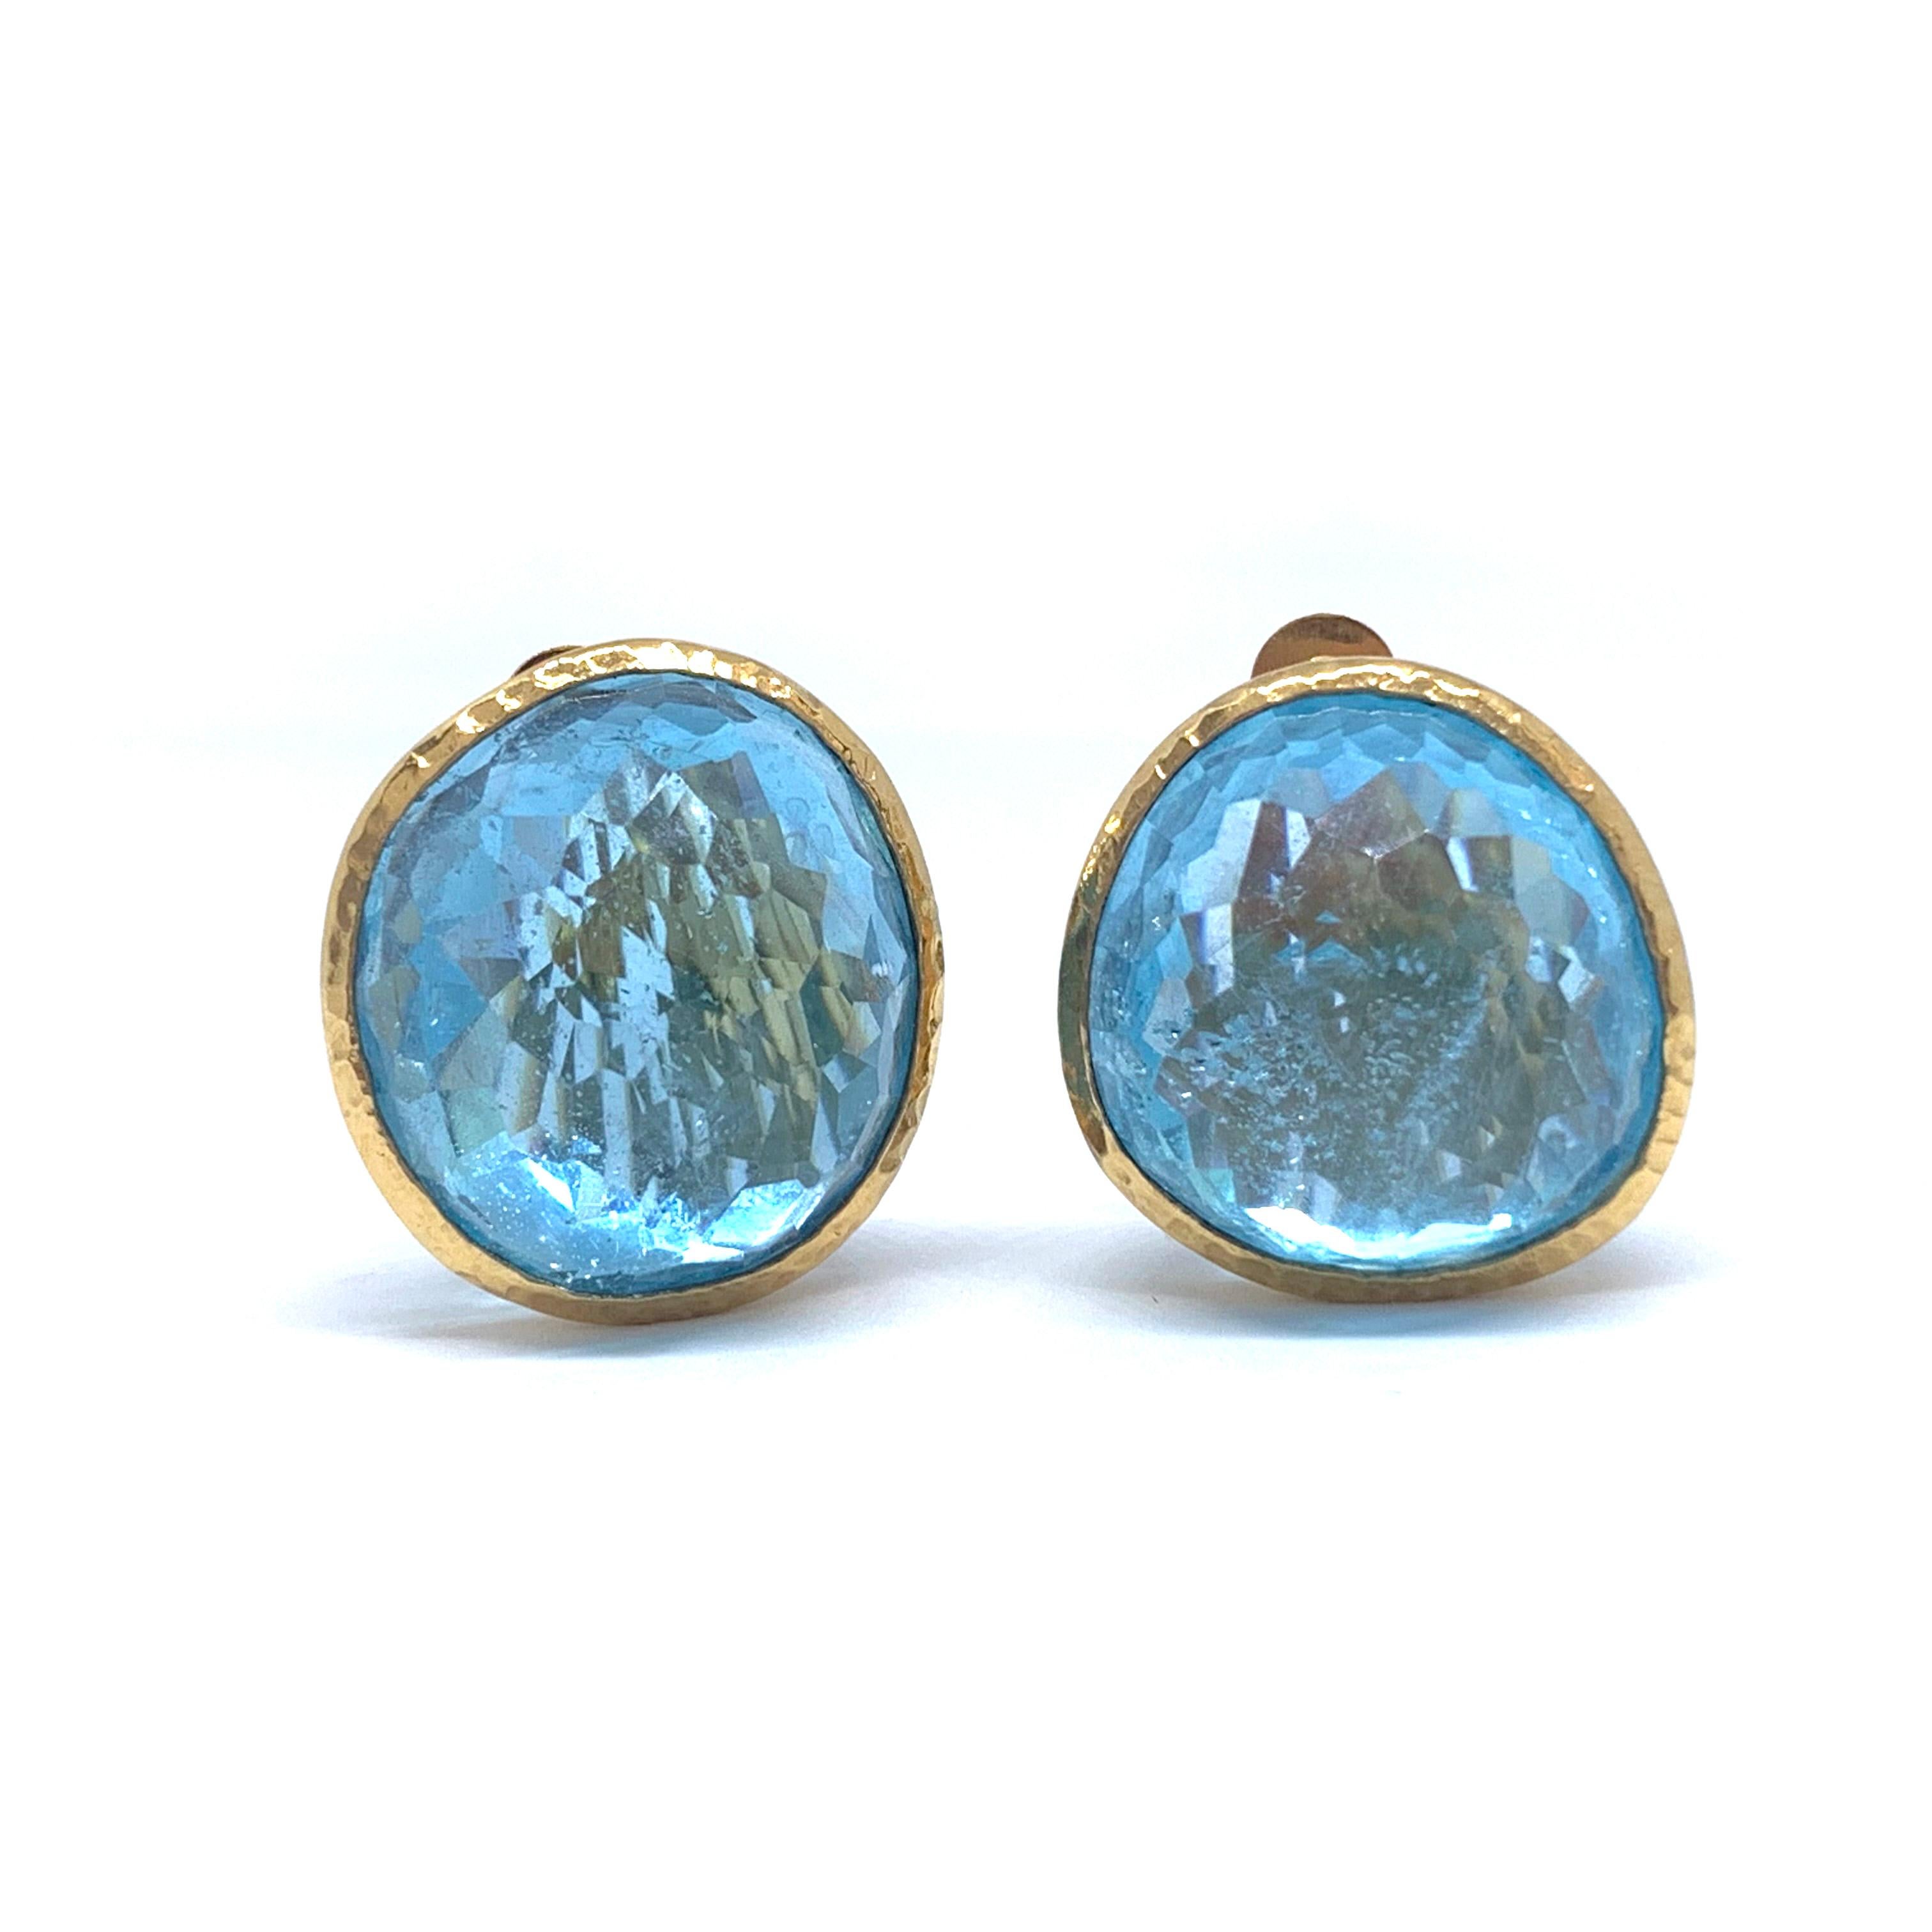 The stunning earrings feature a pair of large 63 carat multi-facet dome-shape genuine blue topaz, hand bezel-set in 18k gold vermeil over sterling silver. Large and comfortable clip backing with rubber jacket for additional support allowing the